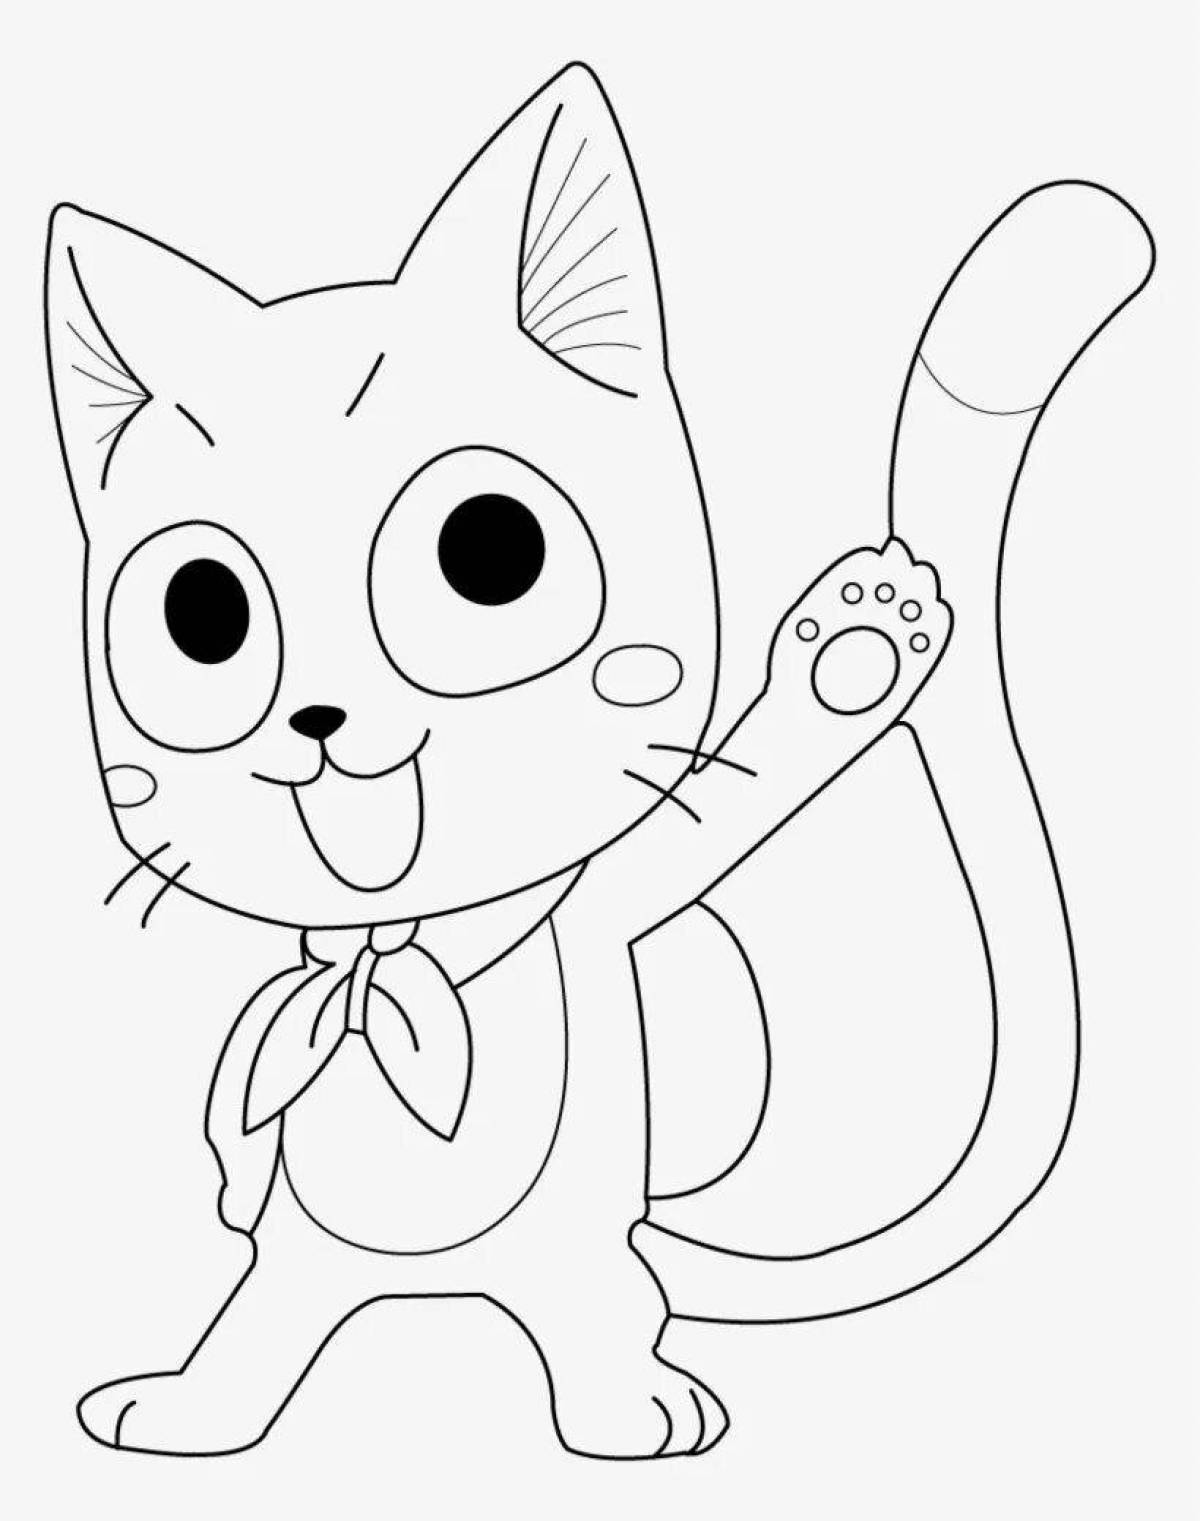 Snuggly kitten chi coloring page